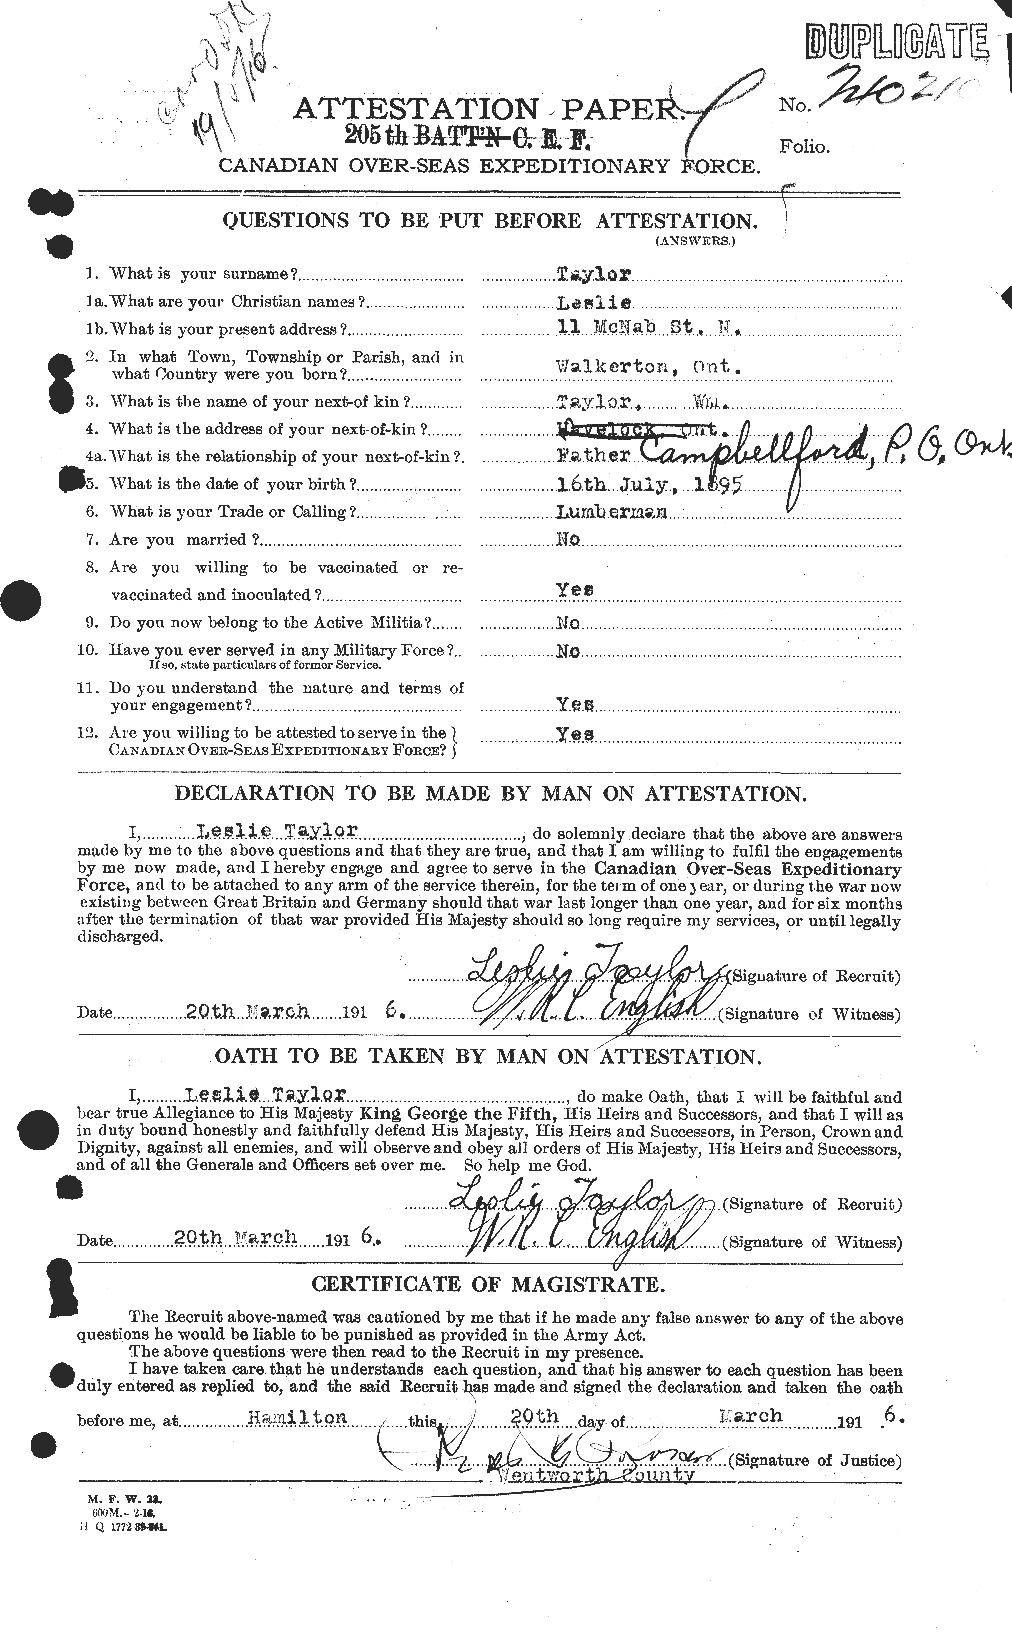 Personnel Records of the First World War - CEF 627635a